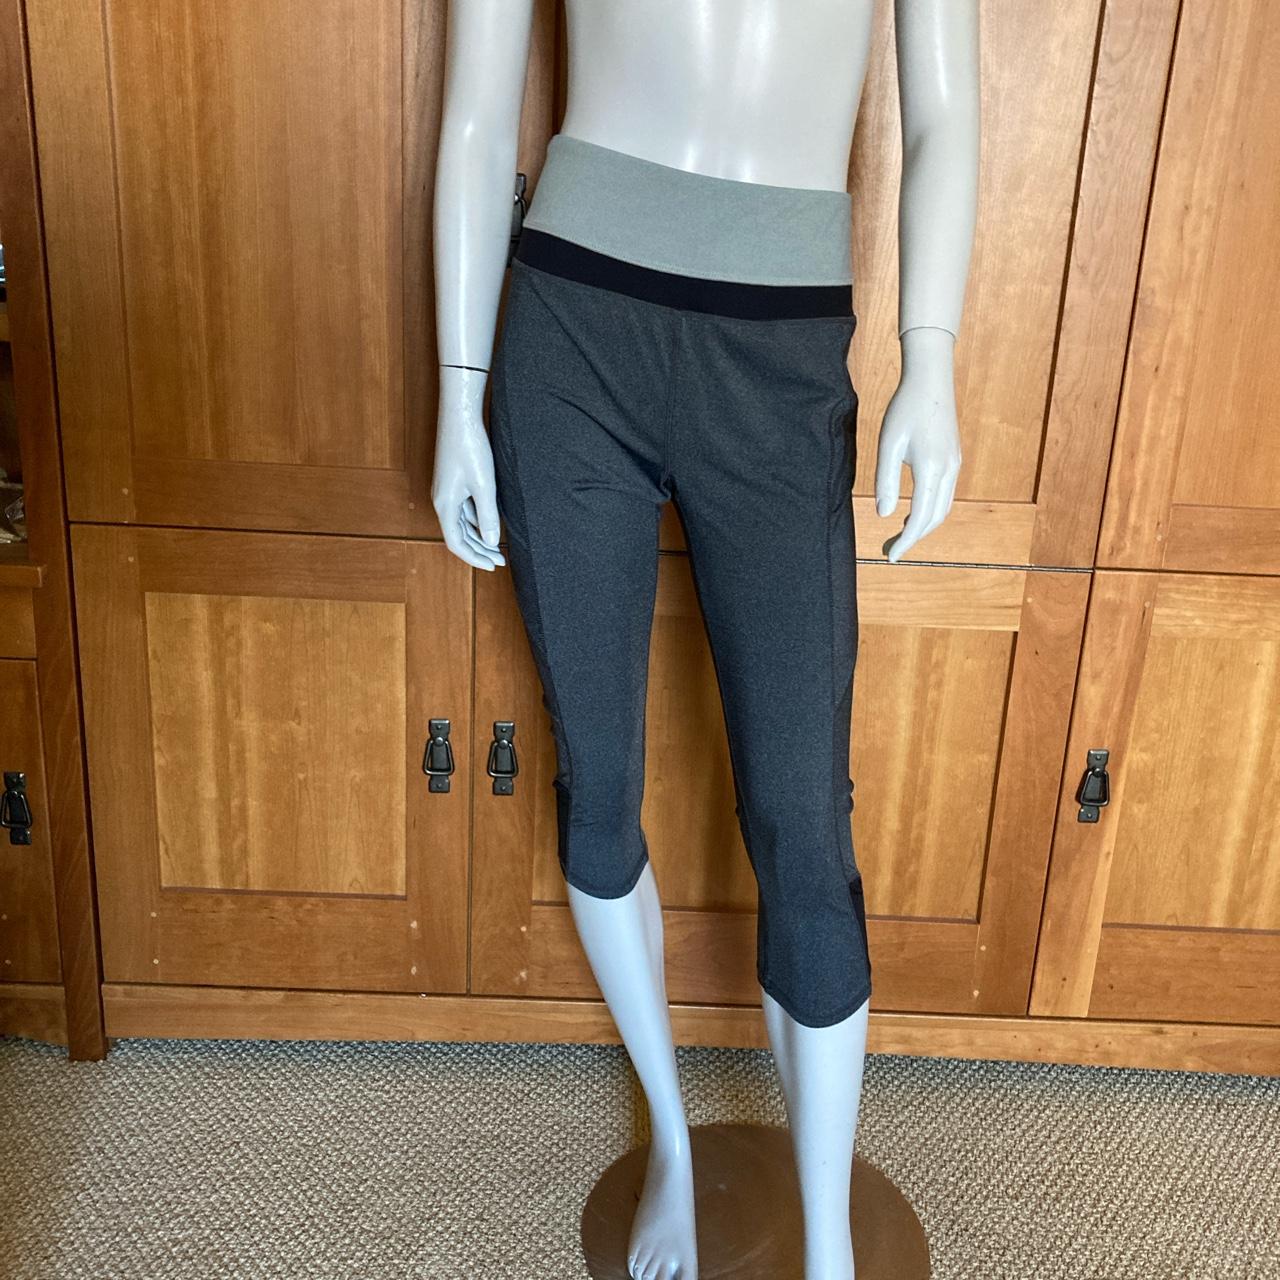 Kyodan women’s brand new with tags cropped athletic